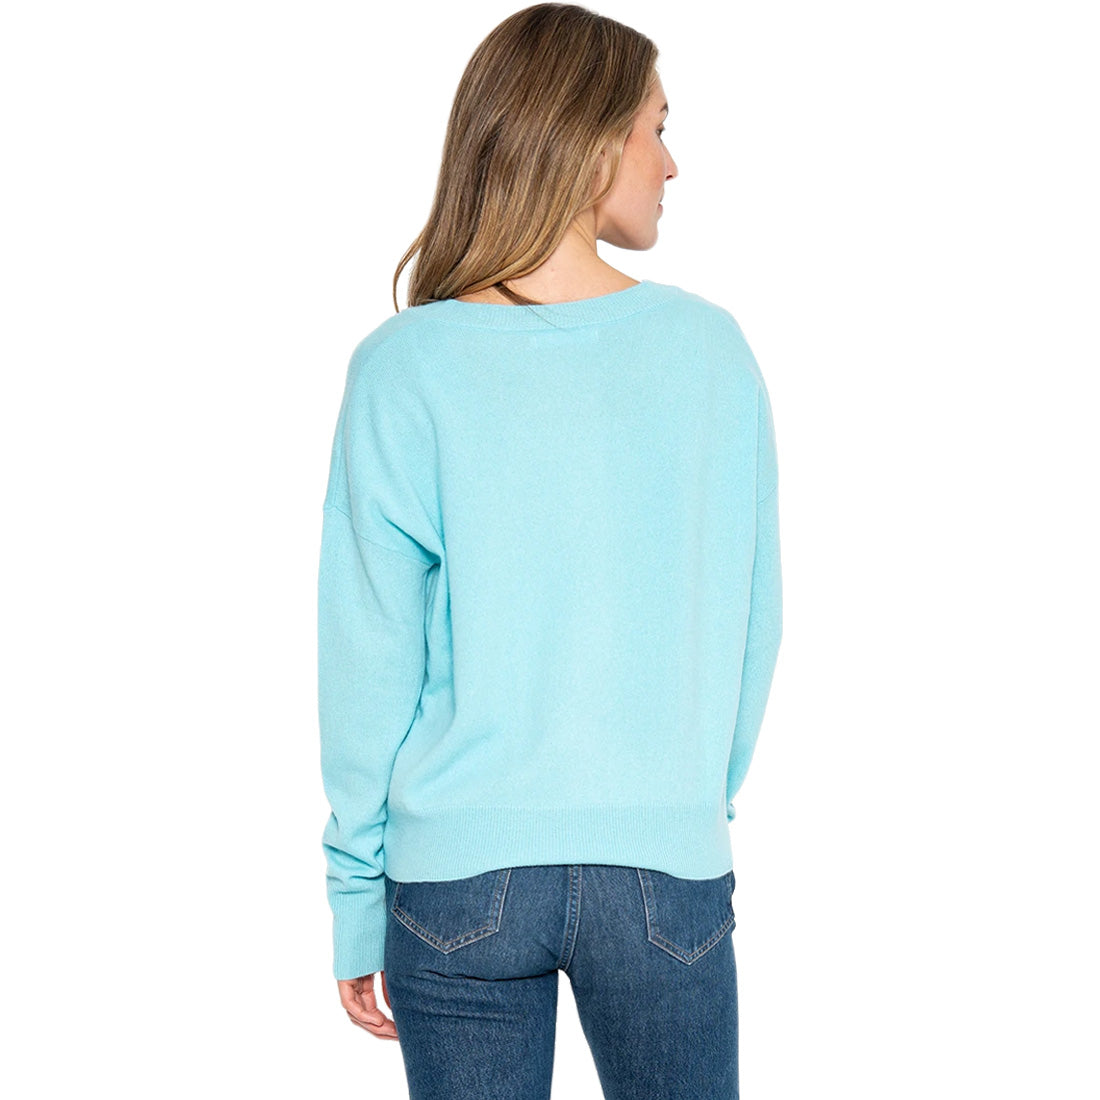 One Grey Day Spencer Cashmere Sweater - Women's